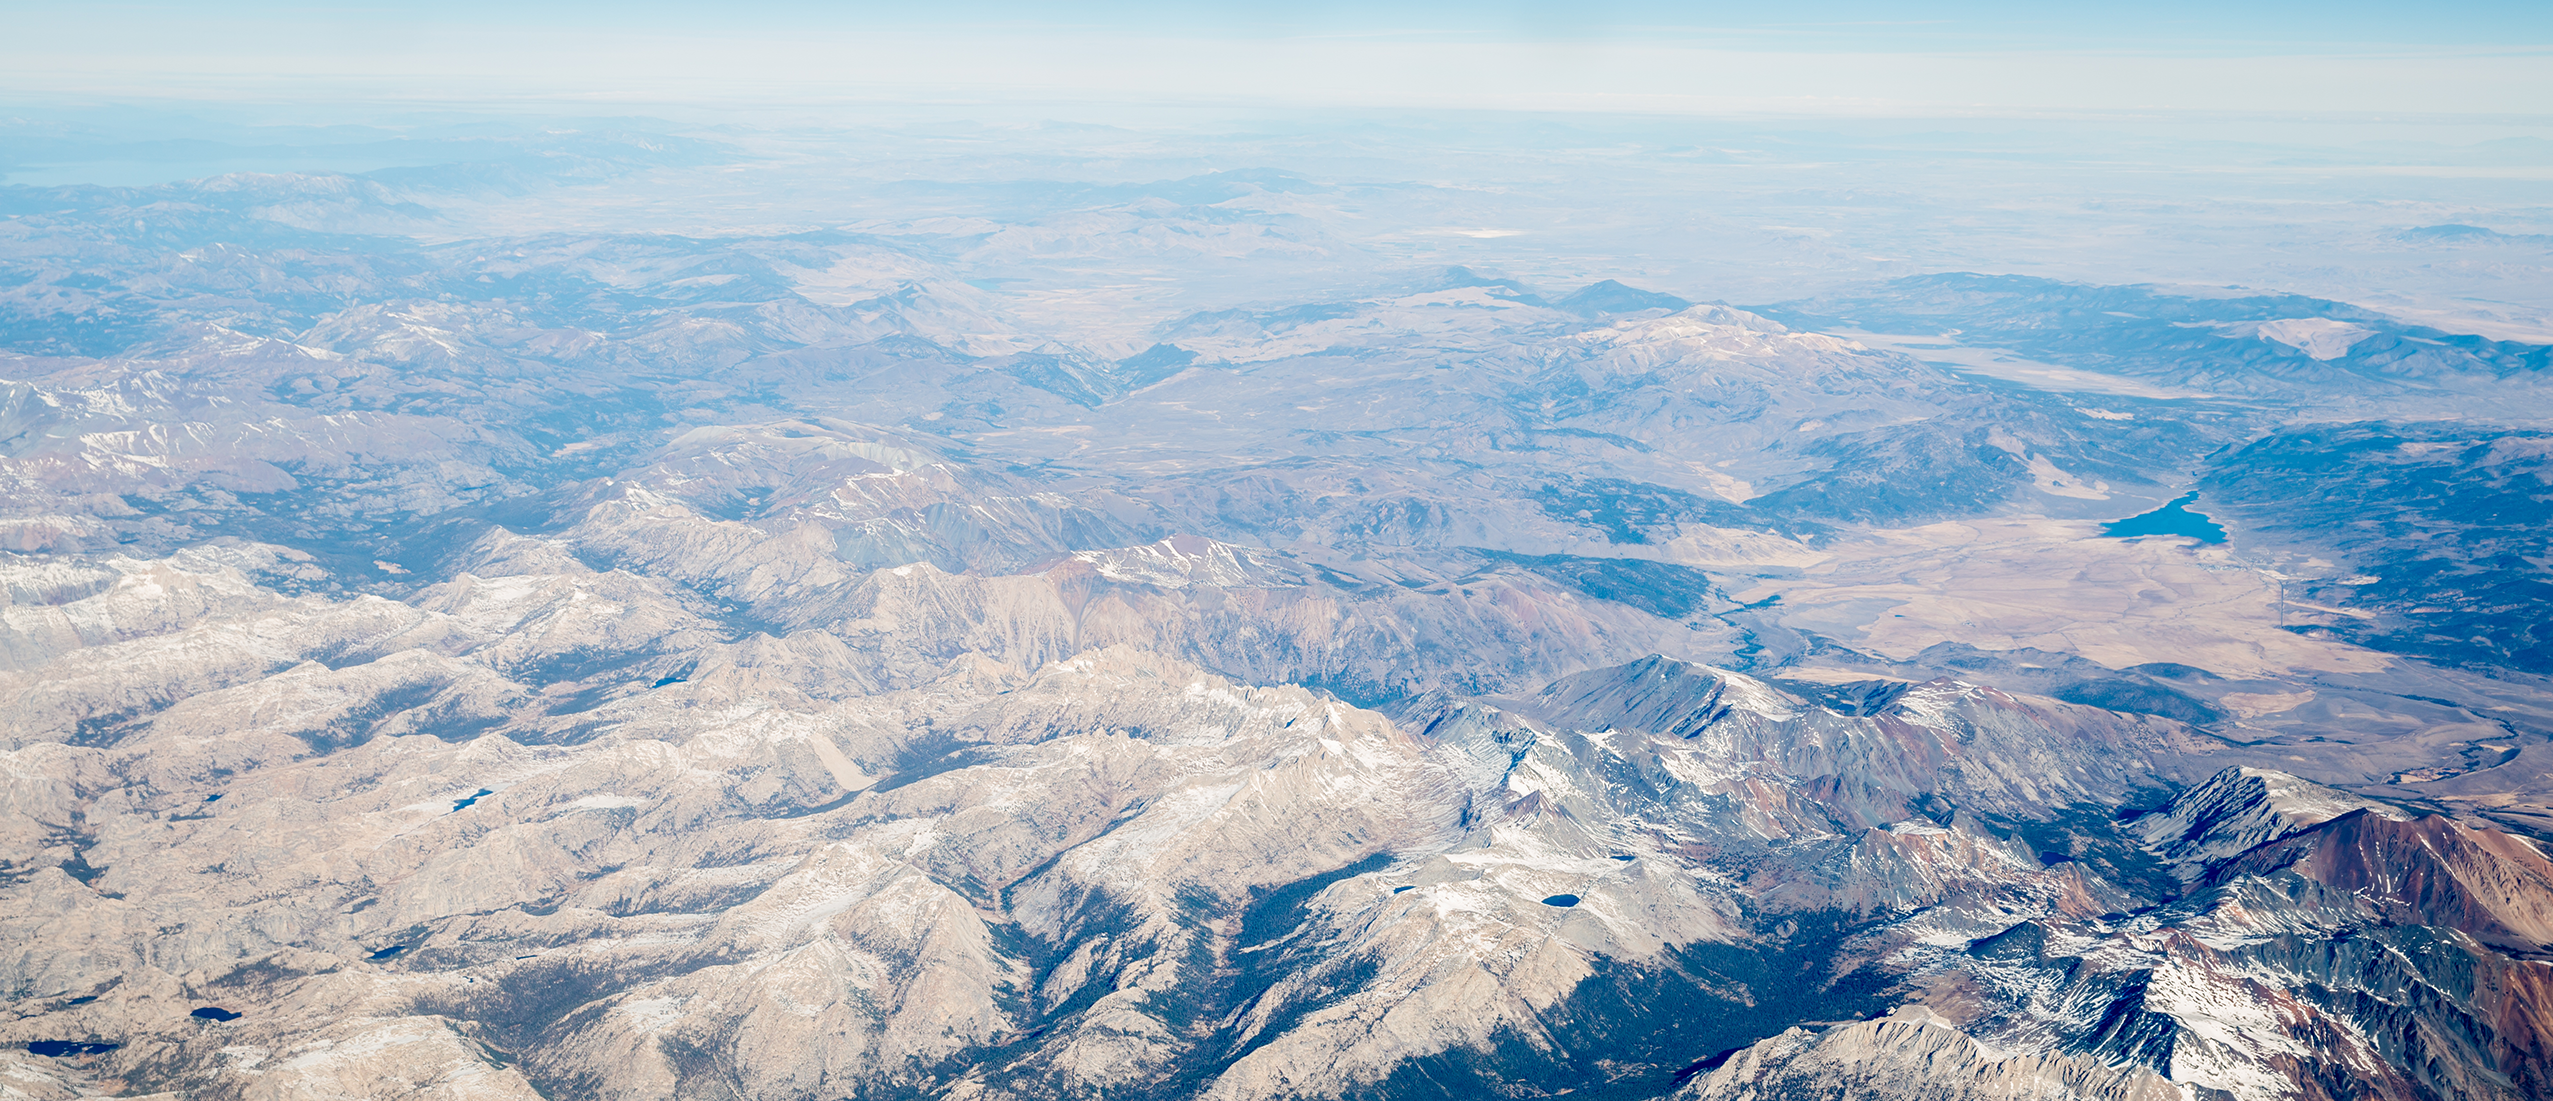 Sierra Nevada Mountians photographed from the sky stretching far into the horizon.